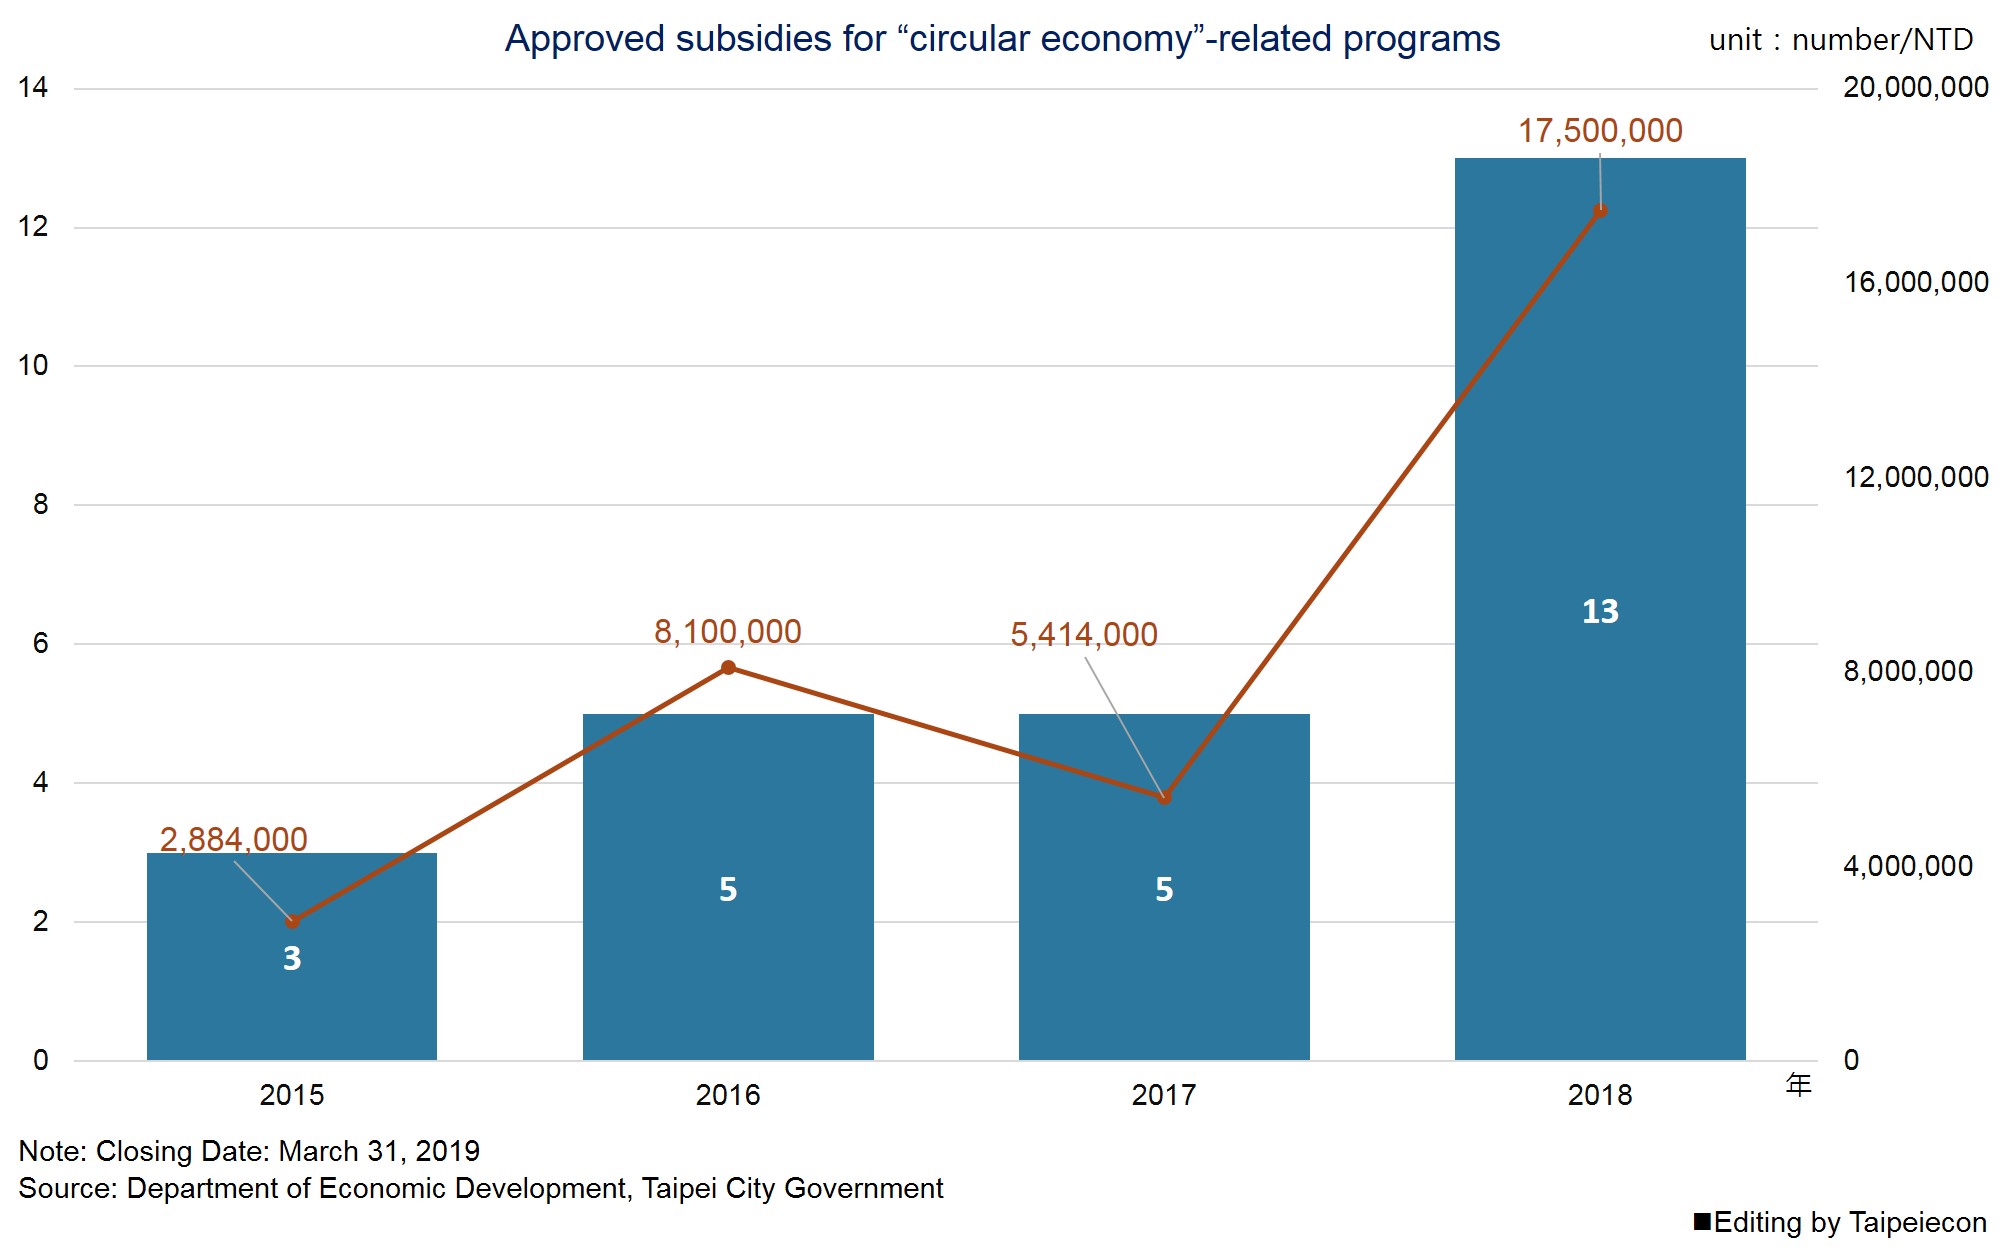 Approved subsidies for “circular economy”-related programs